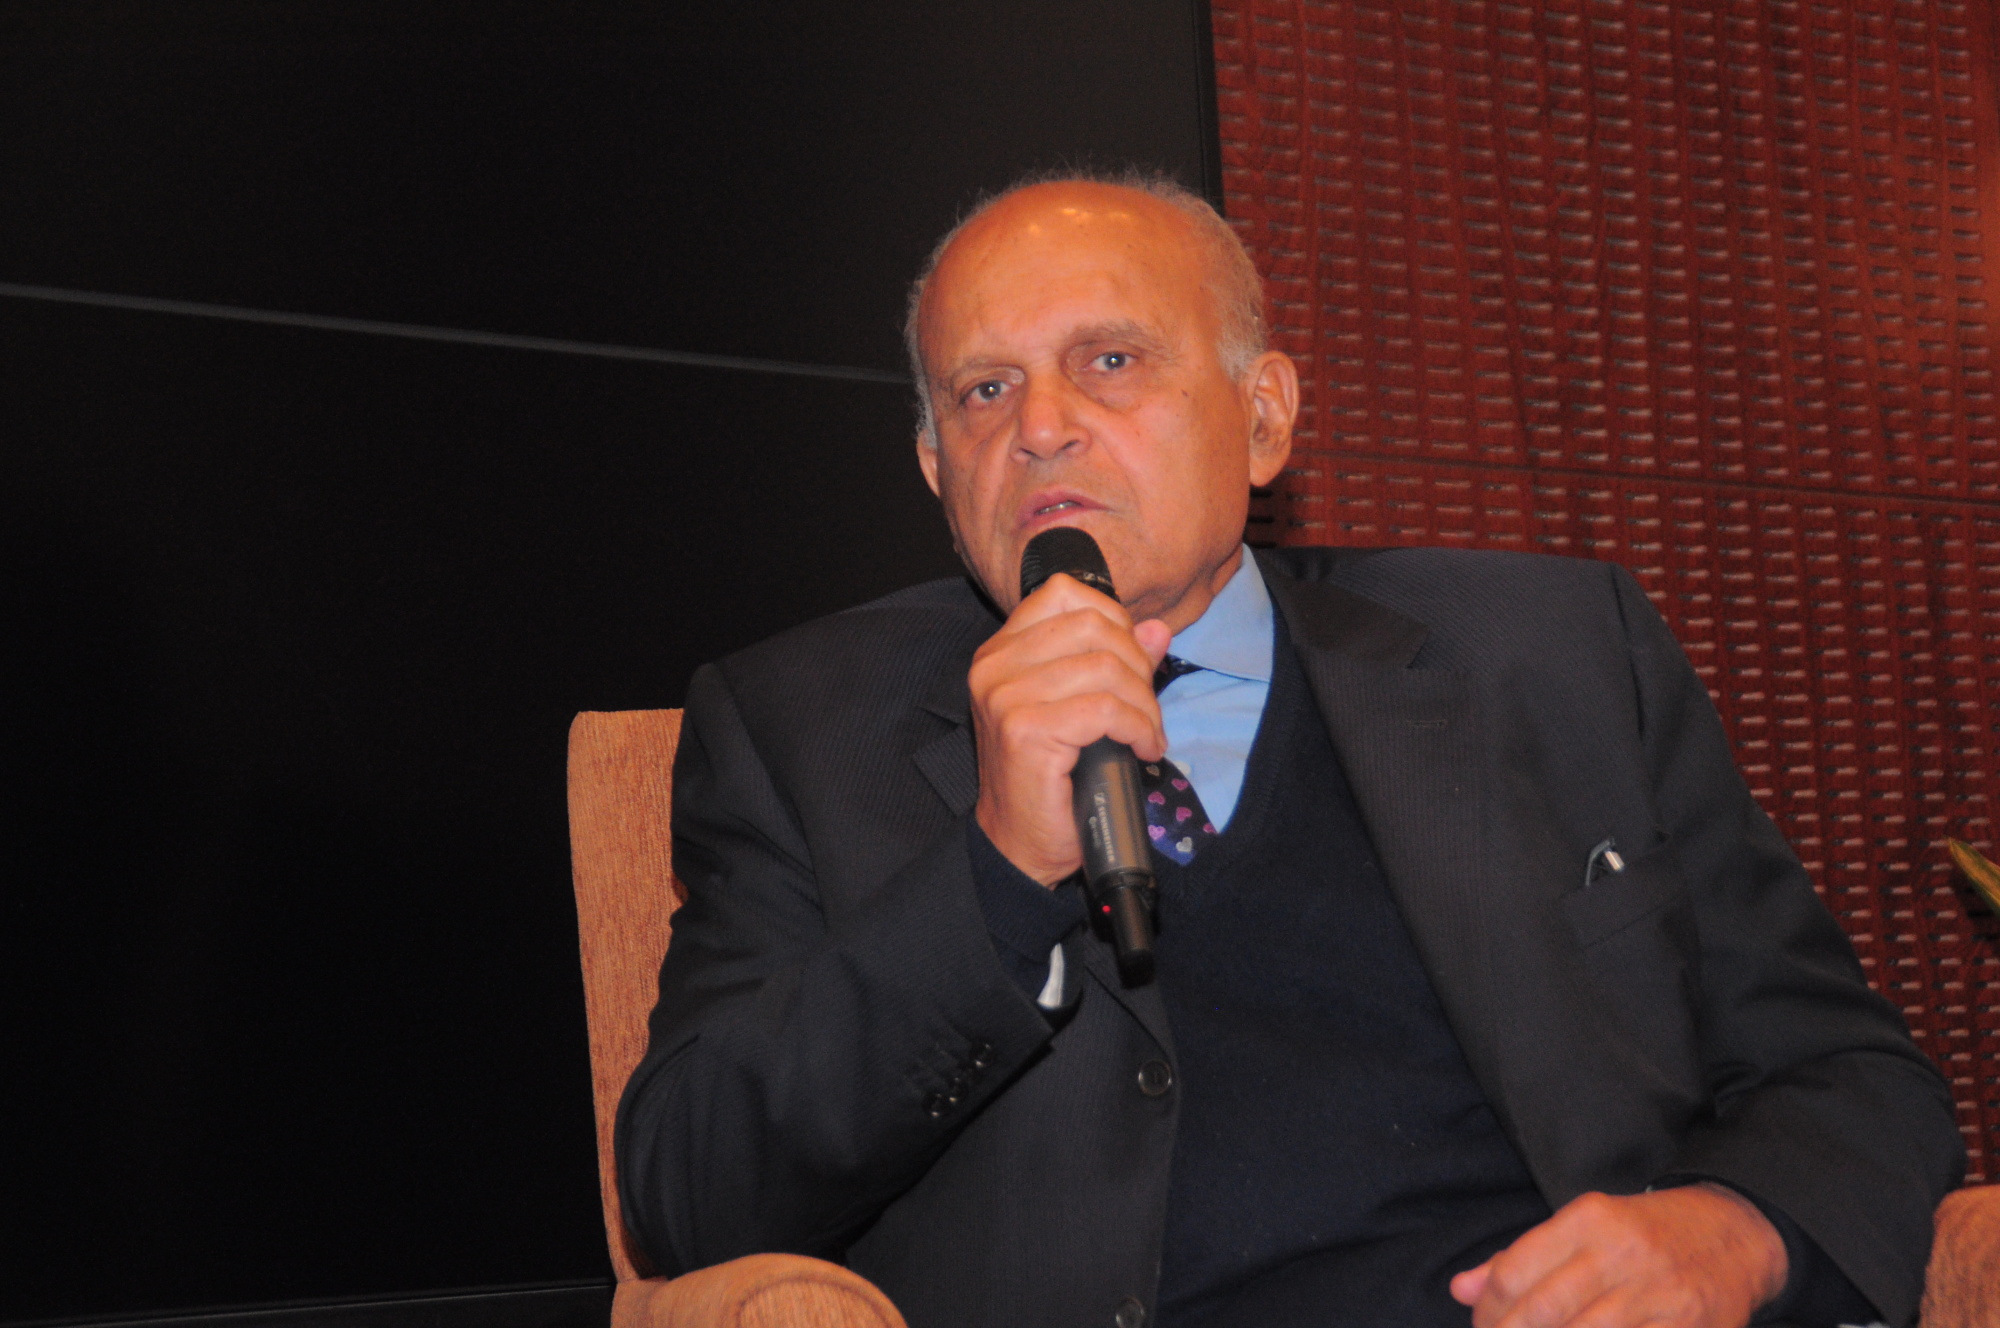 Sir Magdi Yacoub received a Global Impact Award from AUC in 2015, when he also came to AUC for a collaborative partnership between the University and the Magdi Yacoub Heart Foundation